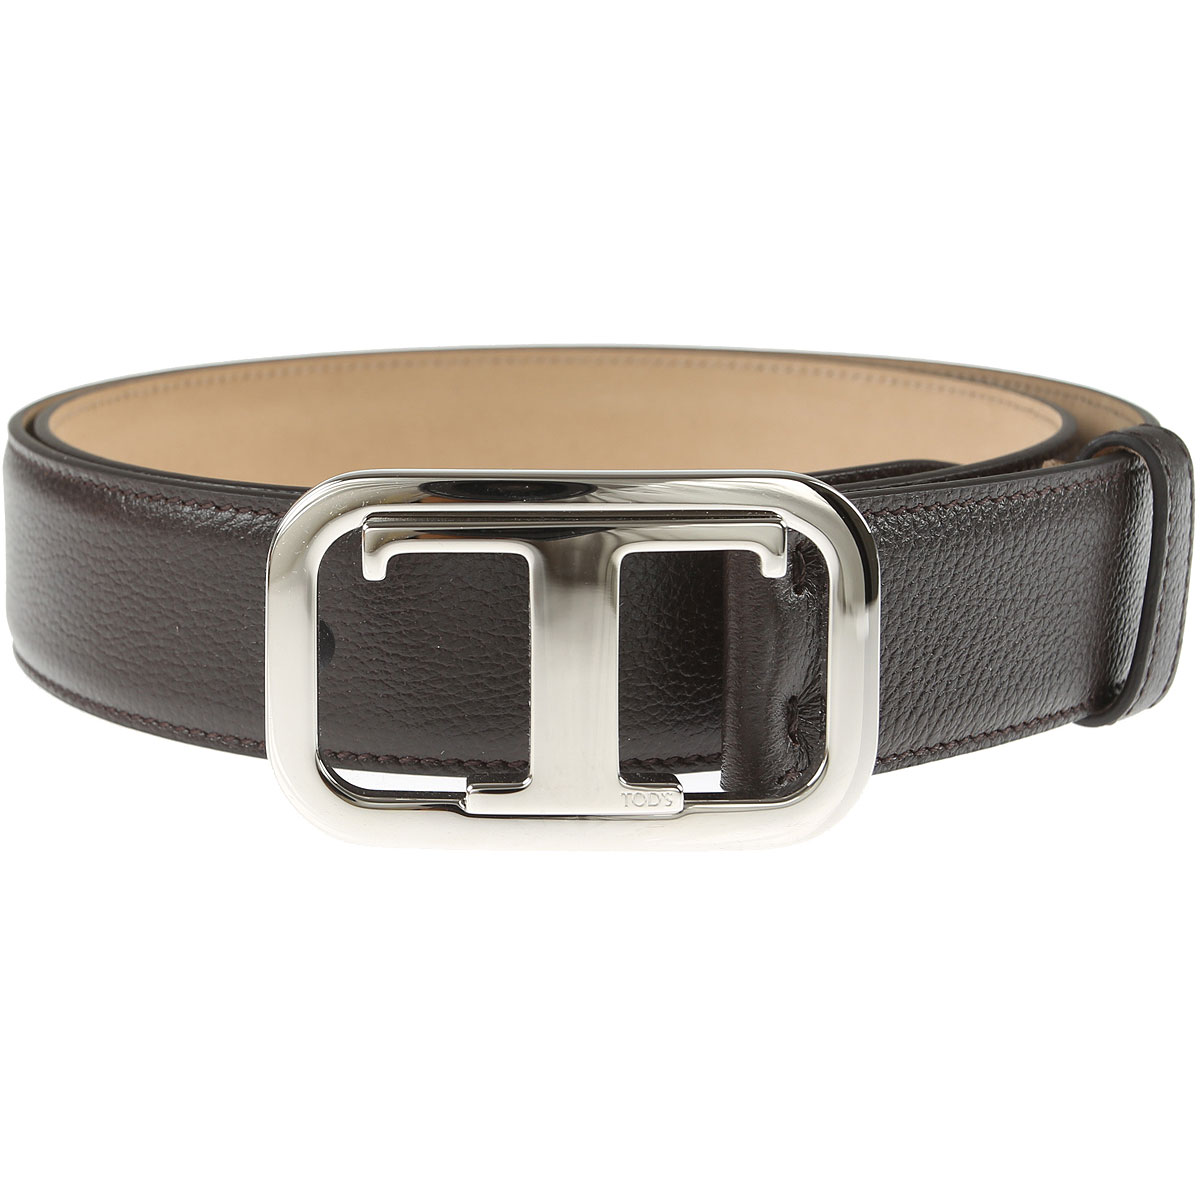 Mens Belts Tods, Style code: xcmcqr70100suns810--